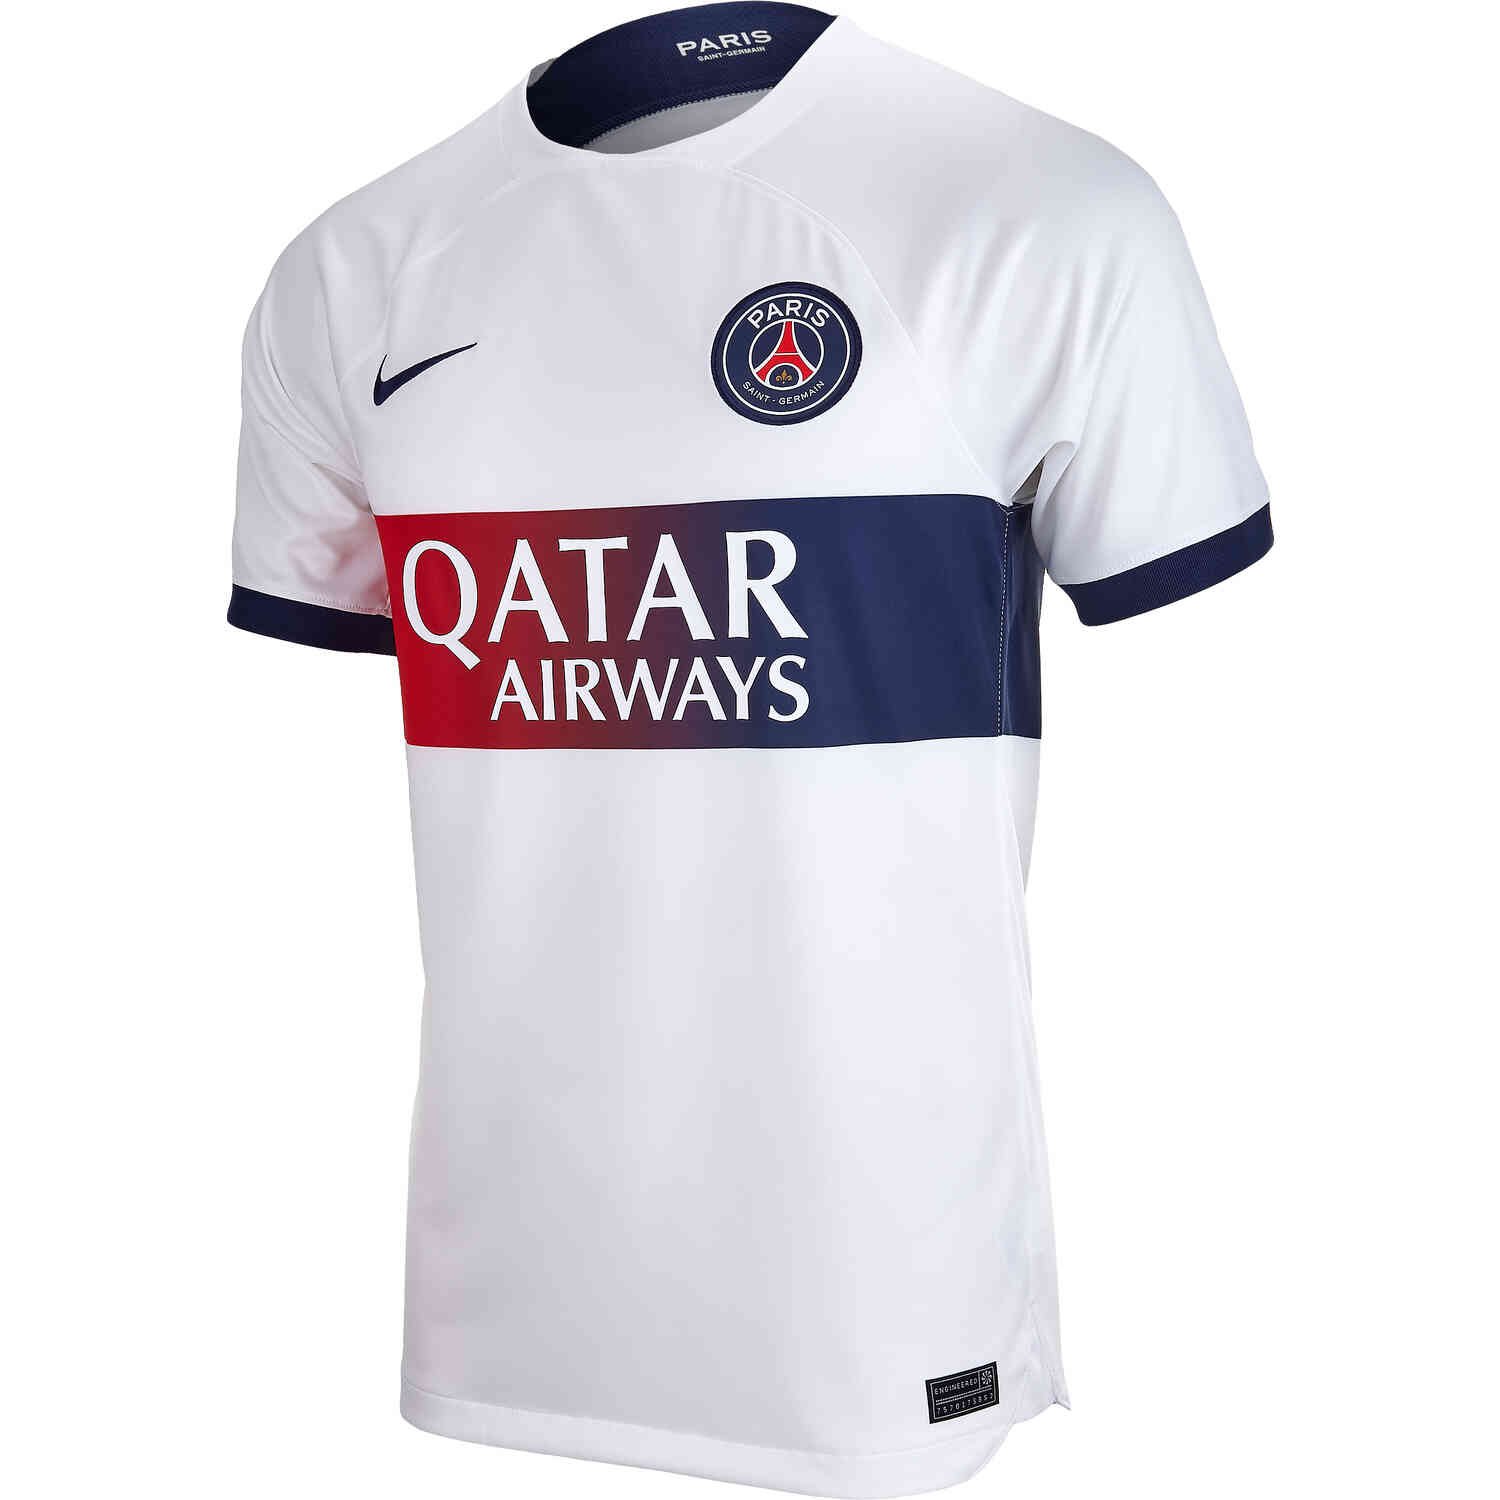 Paris Saint-Germain and Nike launch the new 2023-2024 home jersey